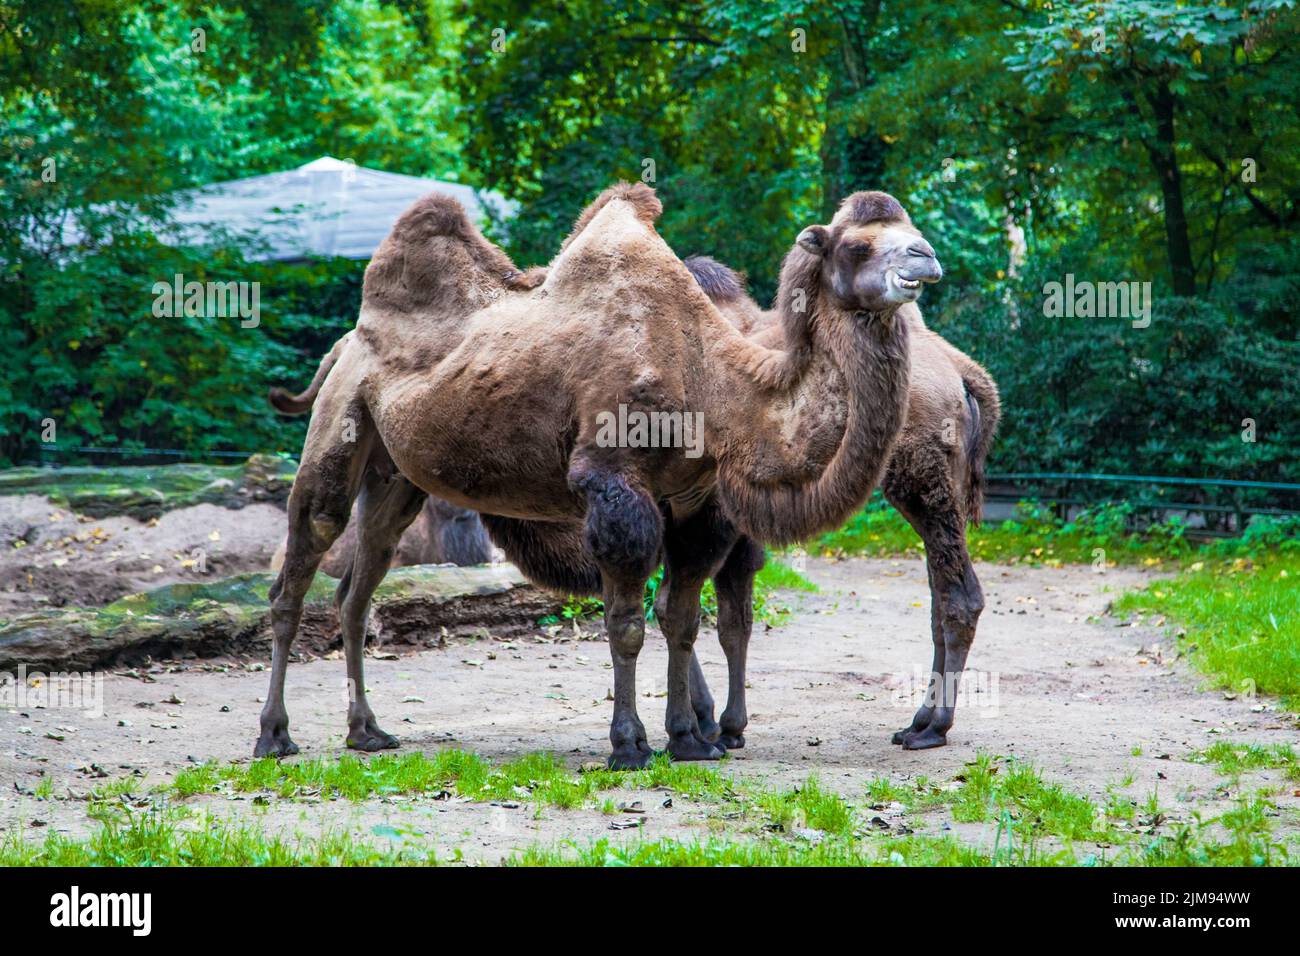 Camel in a Zoo park Stock Photo